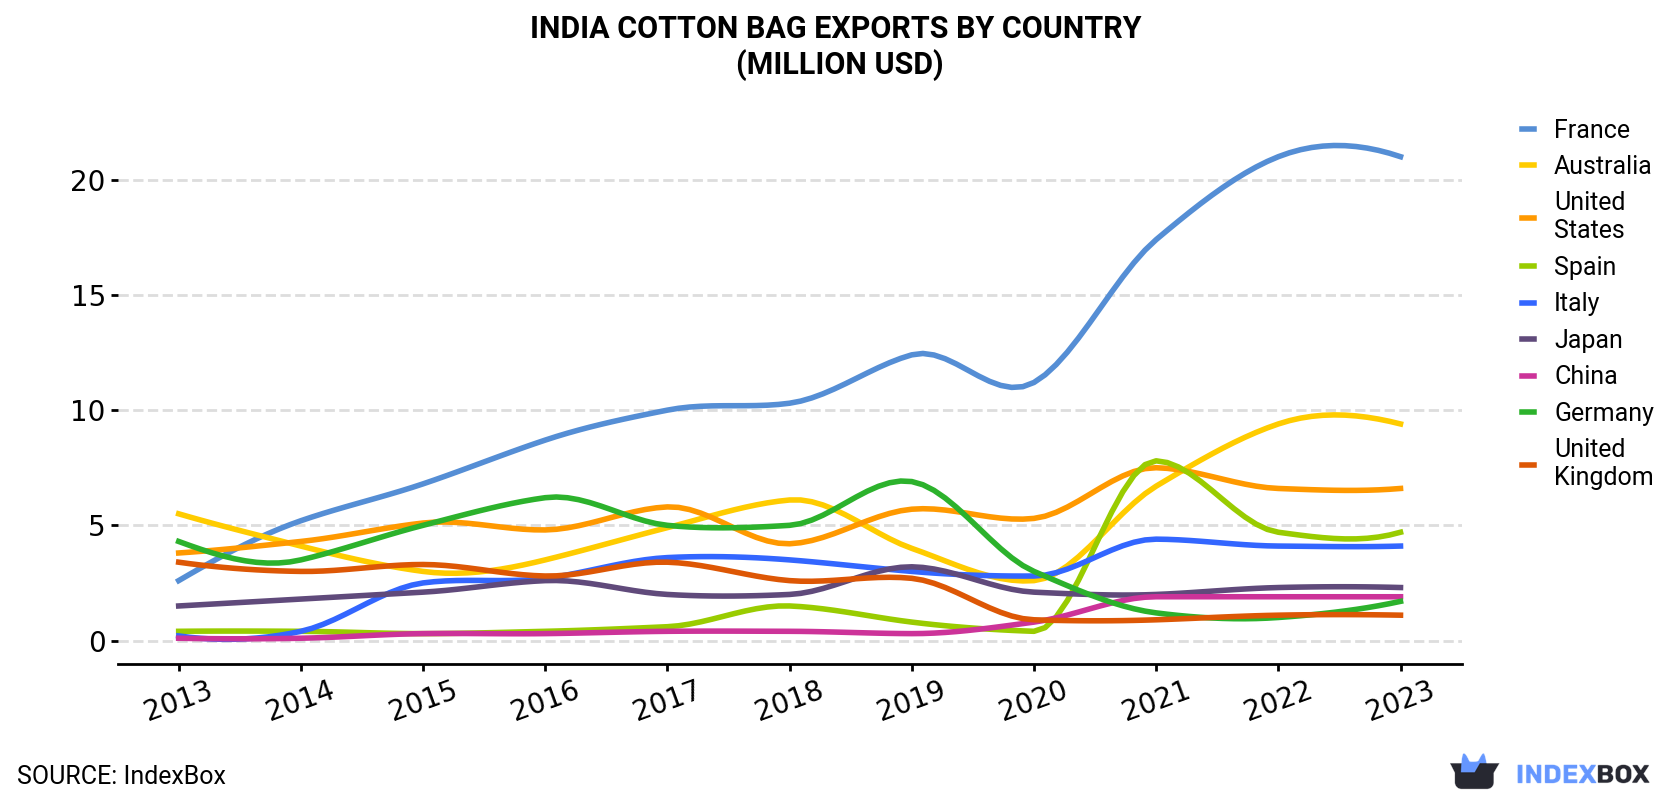 India Cotton Bag Exports By Country (Million USD)